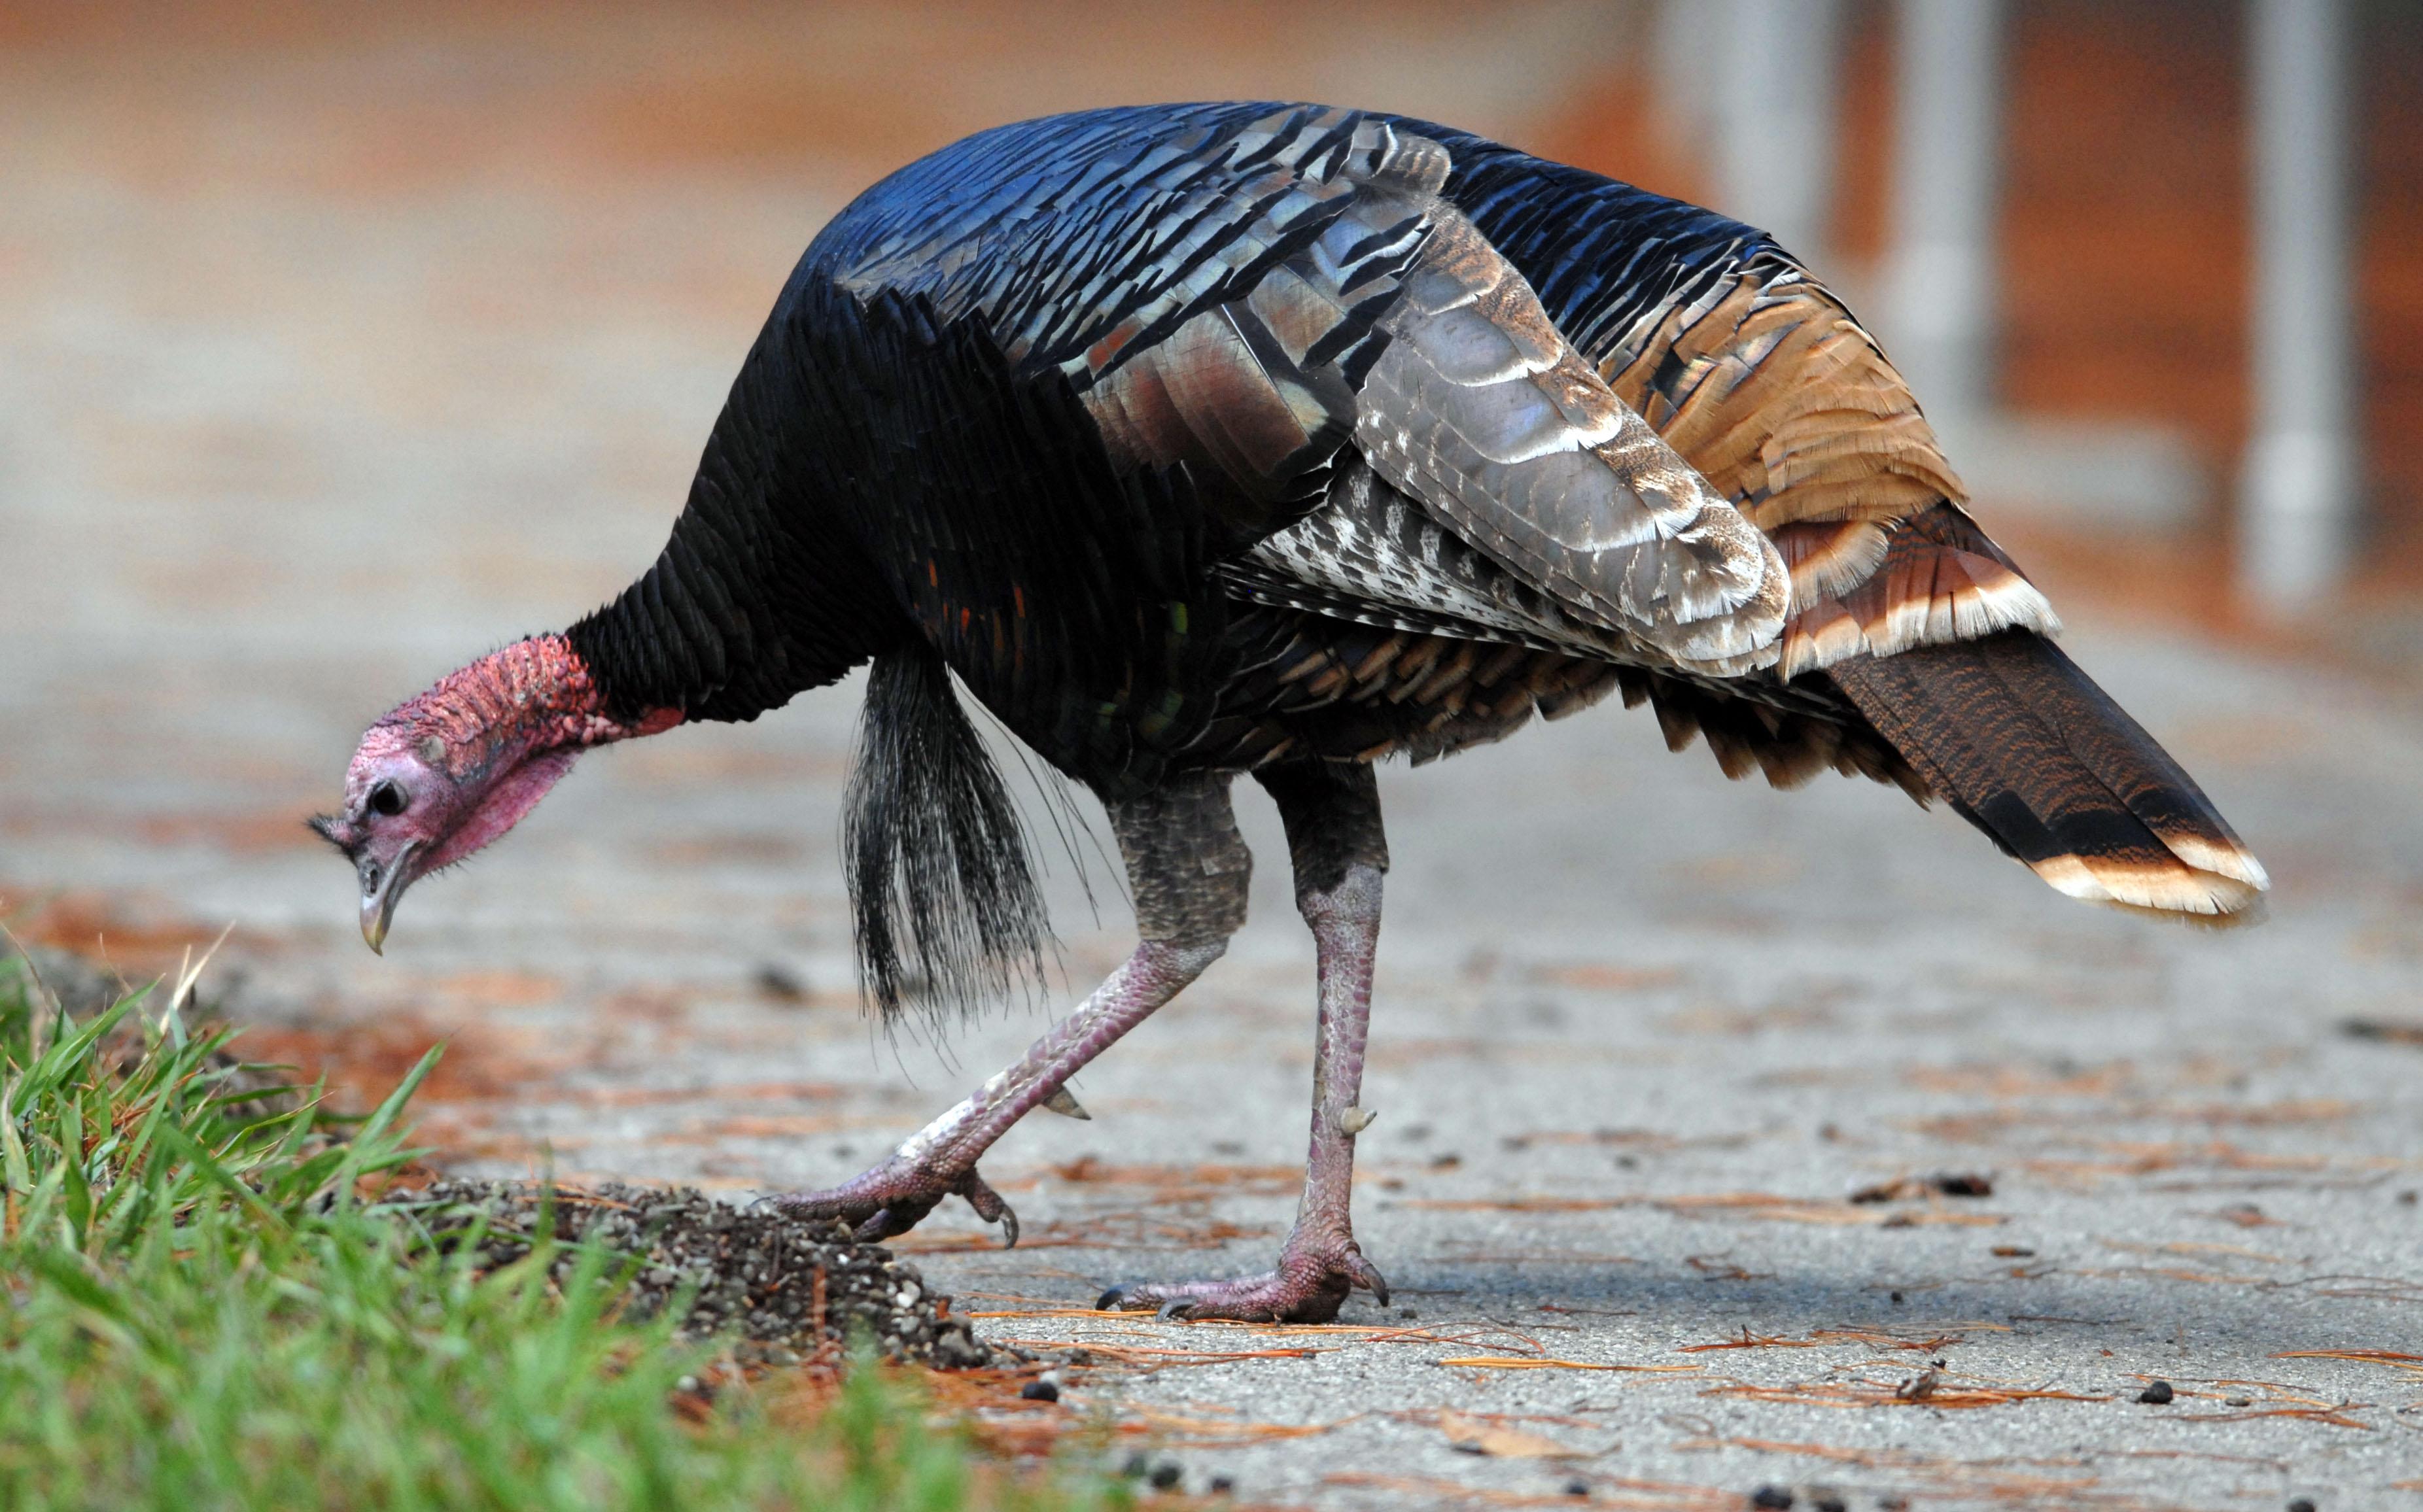 What's keeping a wild turkey from moving on with the flock?